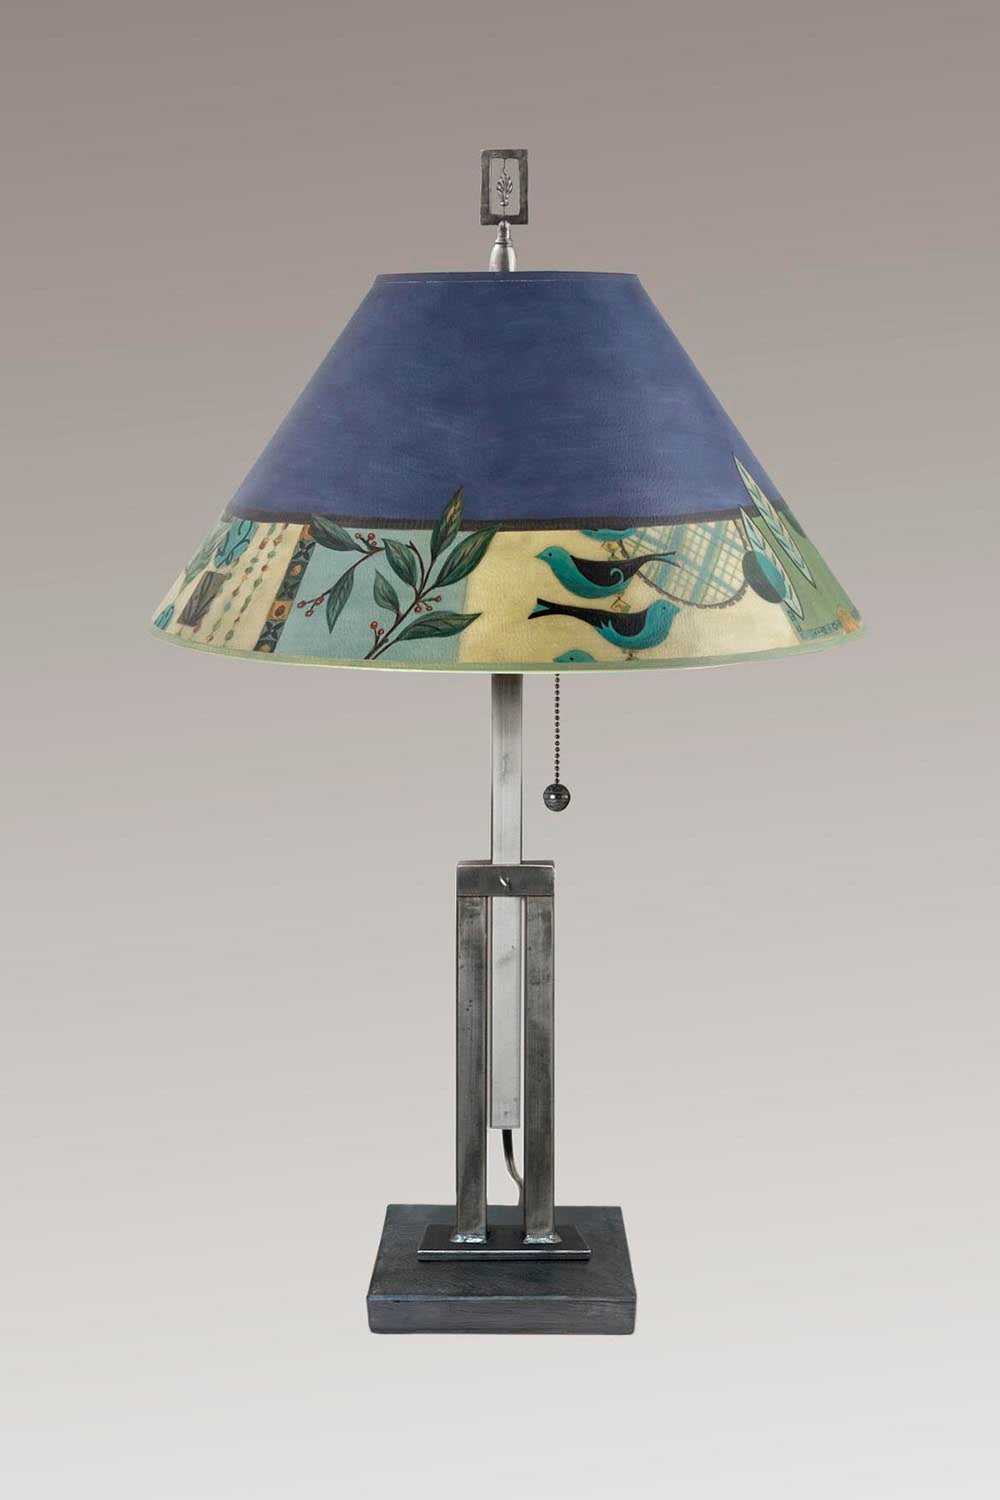 Janna Ugone & Co Table Lamps Adjustable-Height Steel Table Lamp with Large Conical Shade in New Capri Periwinkle